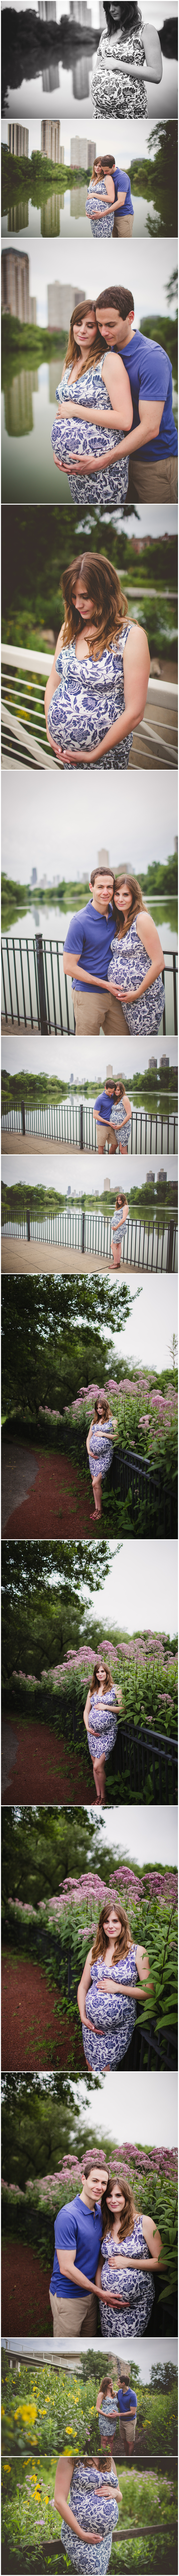 North Pond Maternity Session | Chicago Maternity Photographer | Patricia Anderson Photography